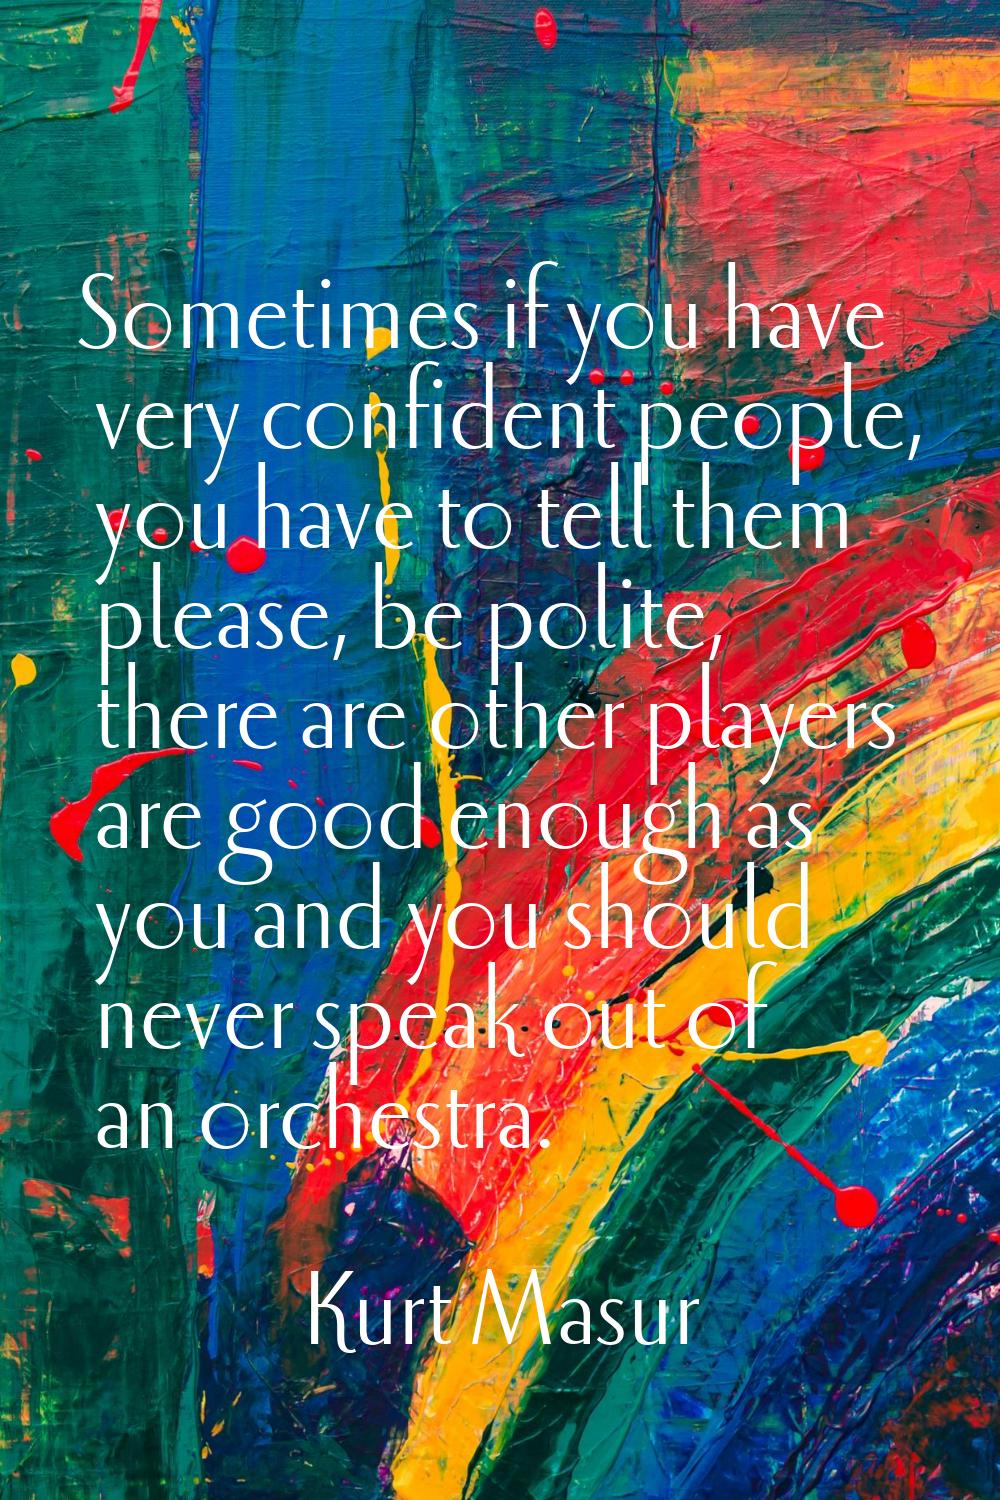 Sometimes if you have very confident people, you have to tell them please, be polite, there are oth